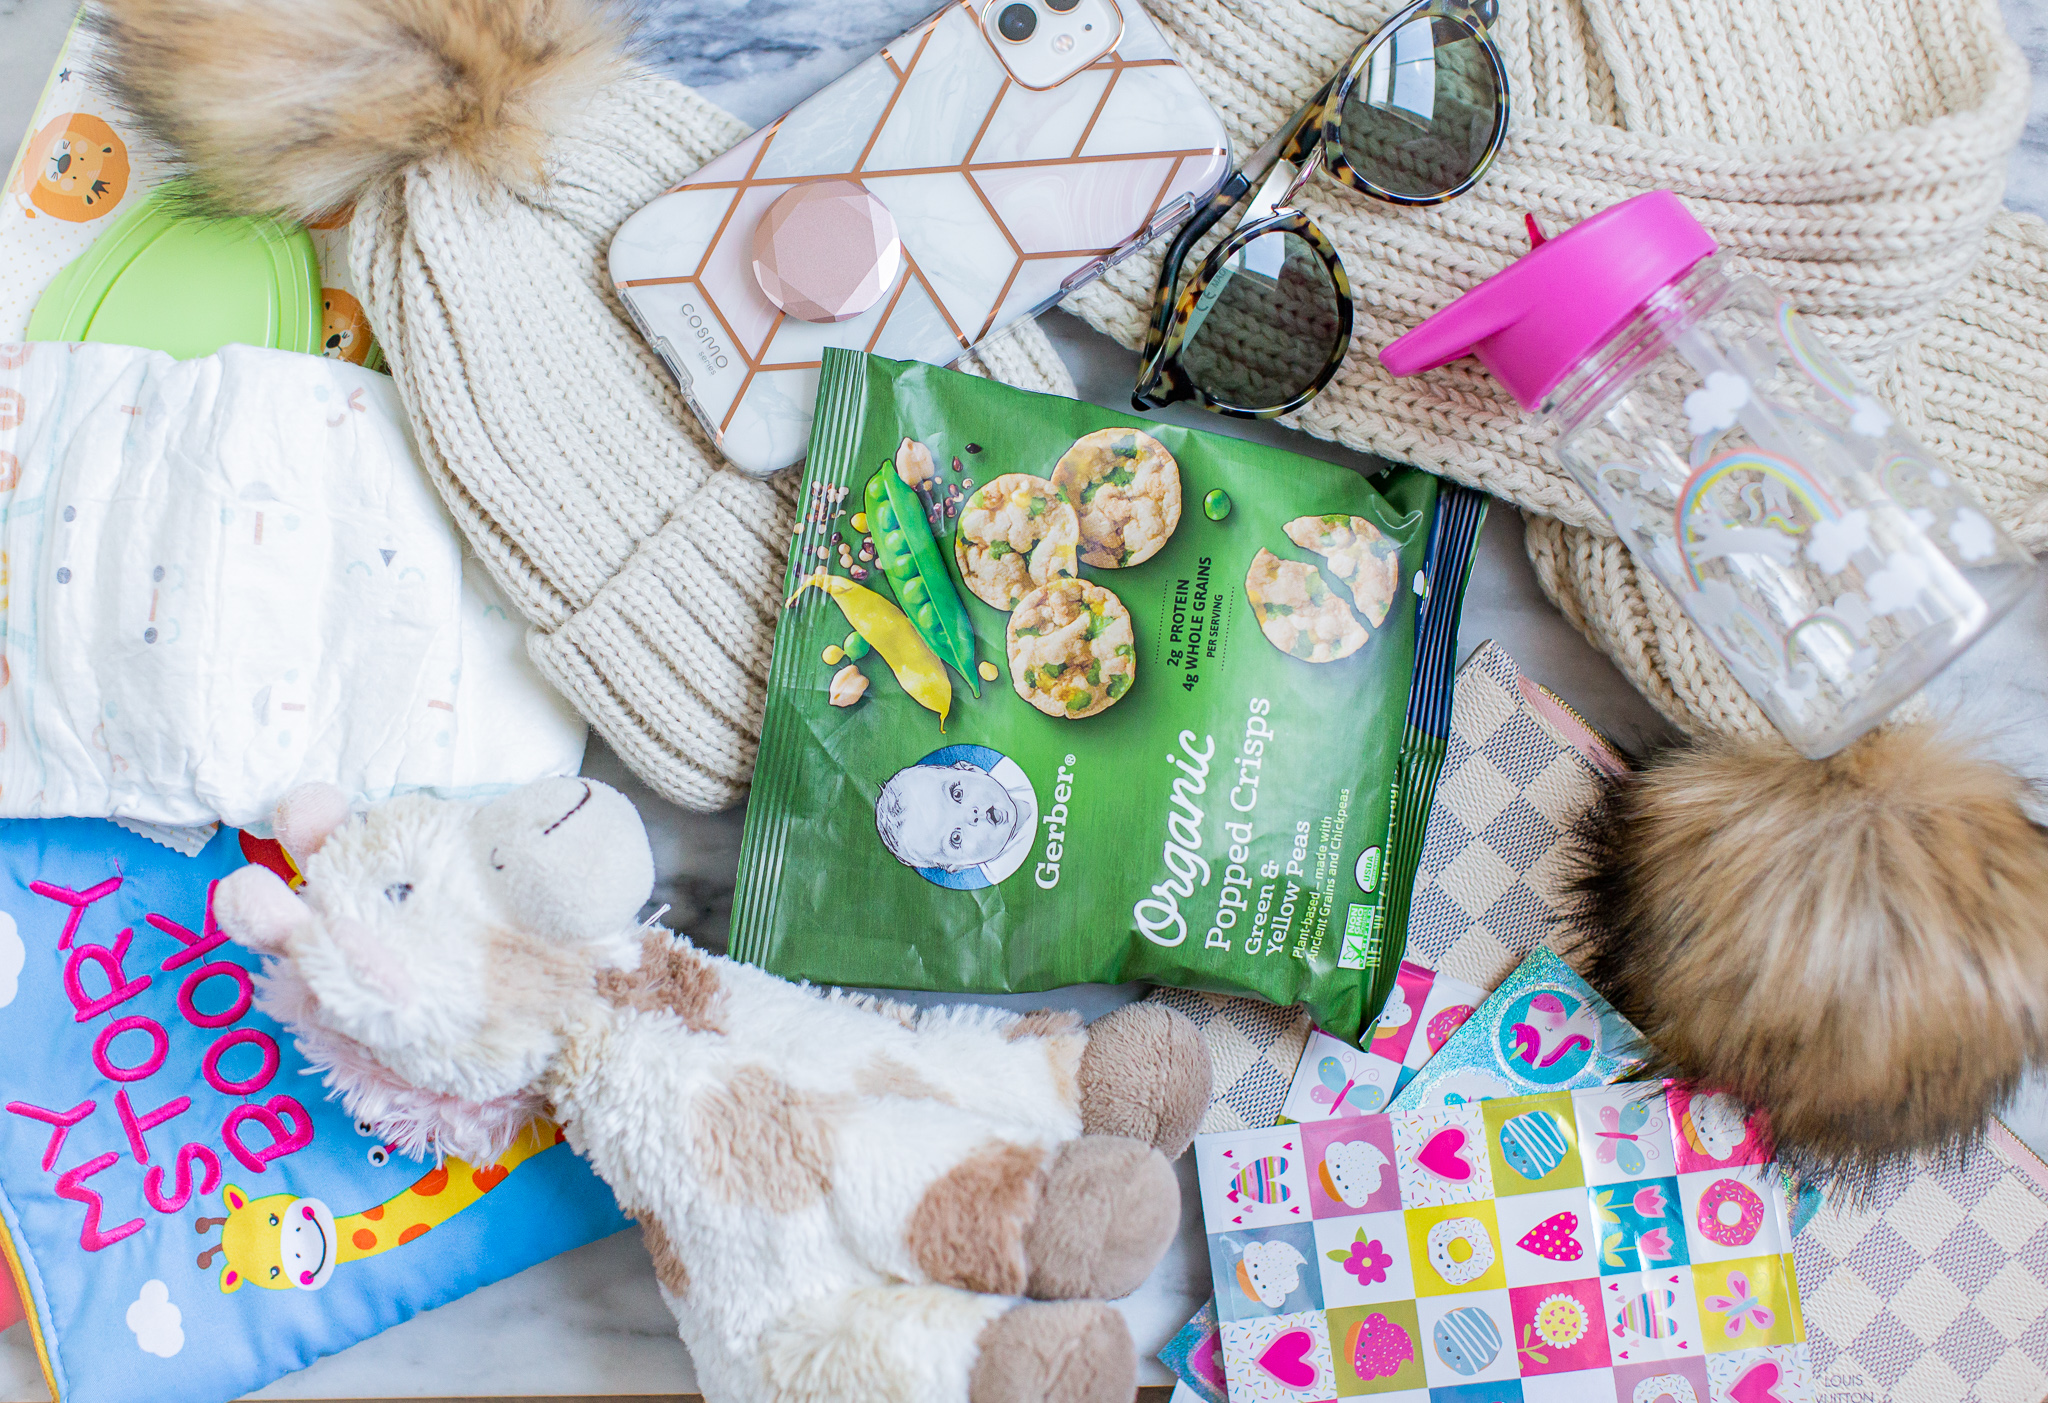 Toddler Diaper Bag Essentials - What's In It (Update) by popular North Carolina lifestyle blog, Coffee Beans and Bobby Pins: image of Gerber Organic Popped Crisps, beanie, giraffe toy, sippy cup, sunglasses, stickers, diaper, diaper wipes, and My Story Book.